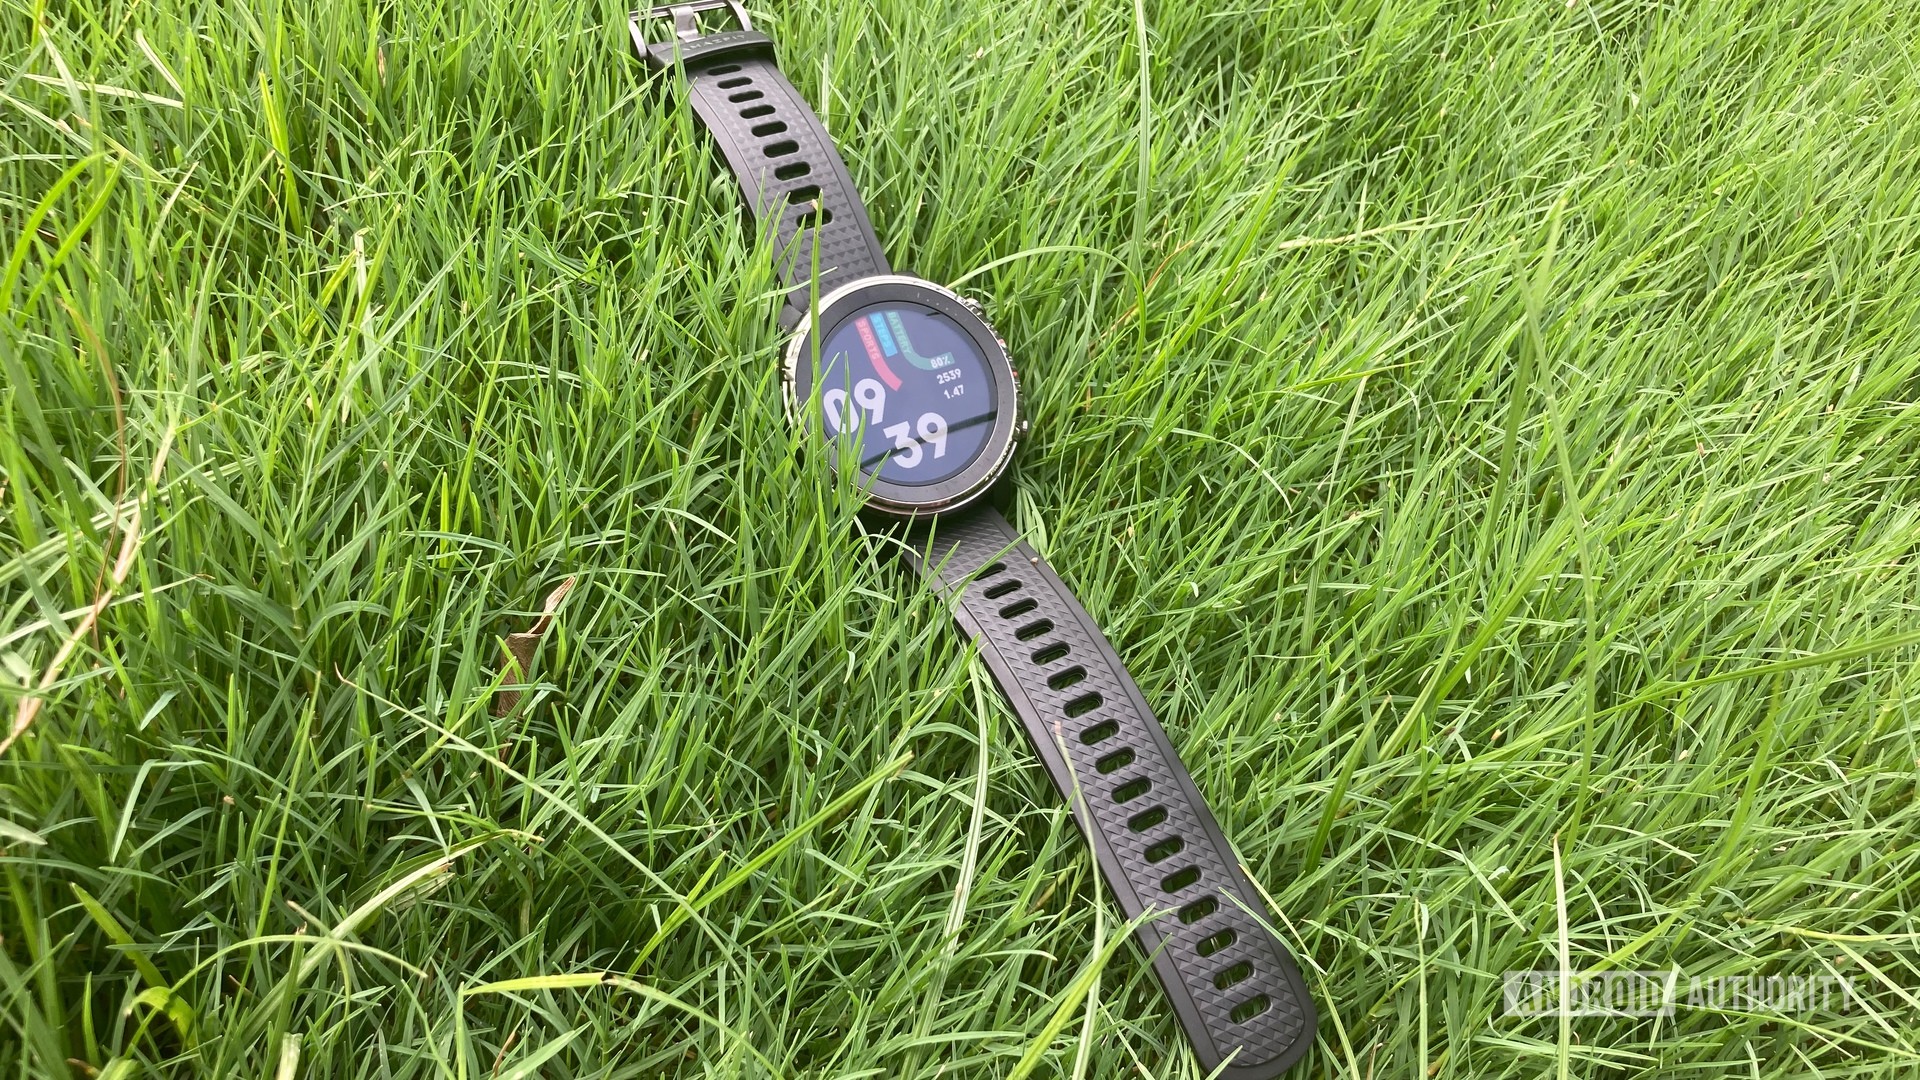 An image of the Amazfit Stratos 3 lying on grass